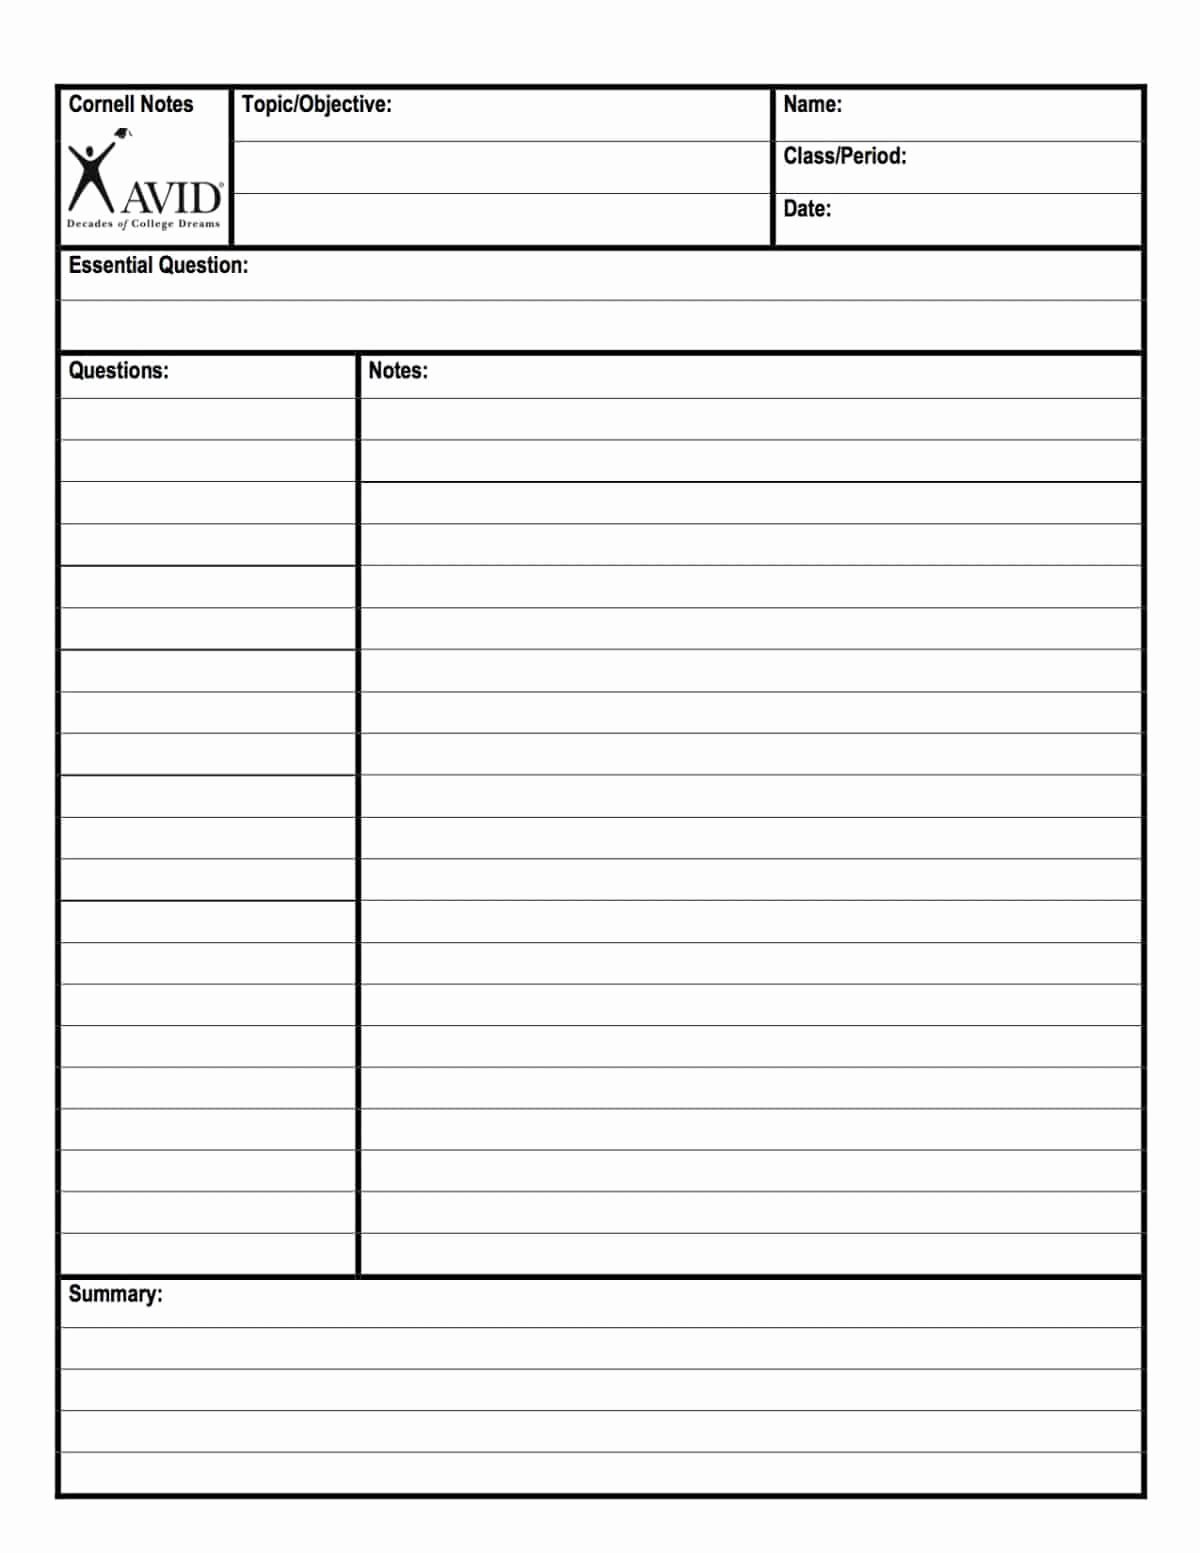 Avid Lesson Plan Template Awesome A Guide to Implementing the Cornell Note Template System